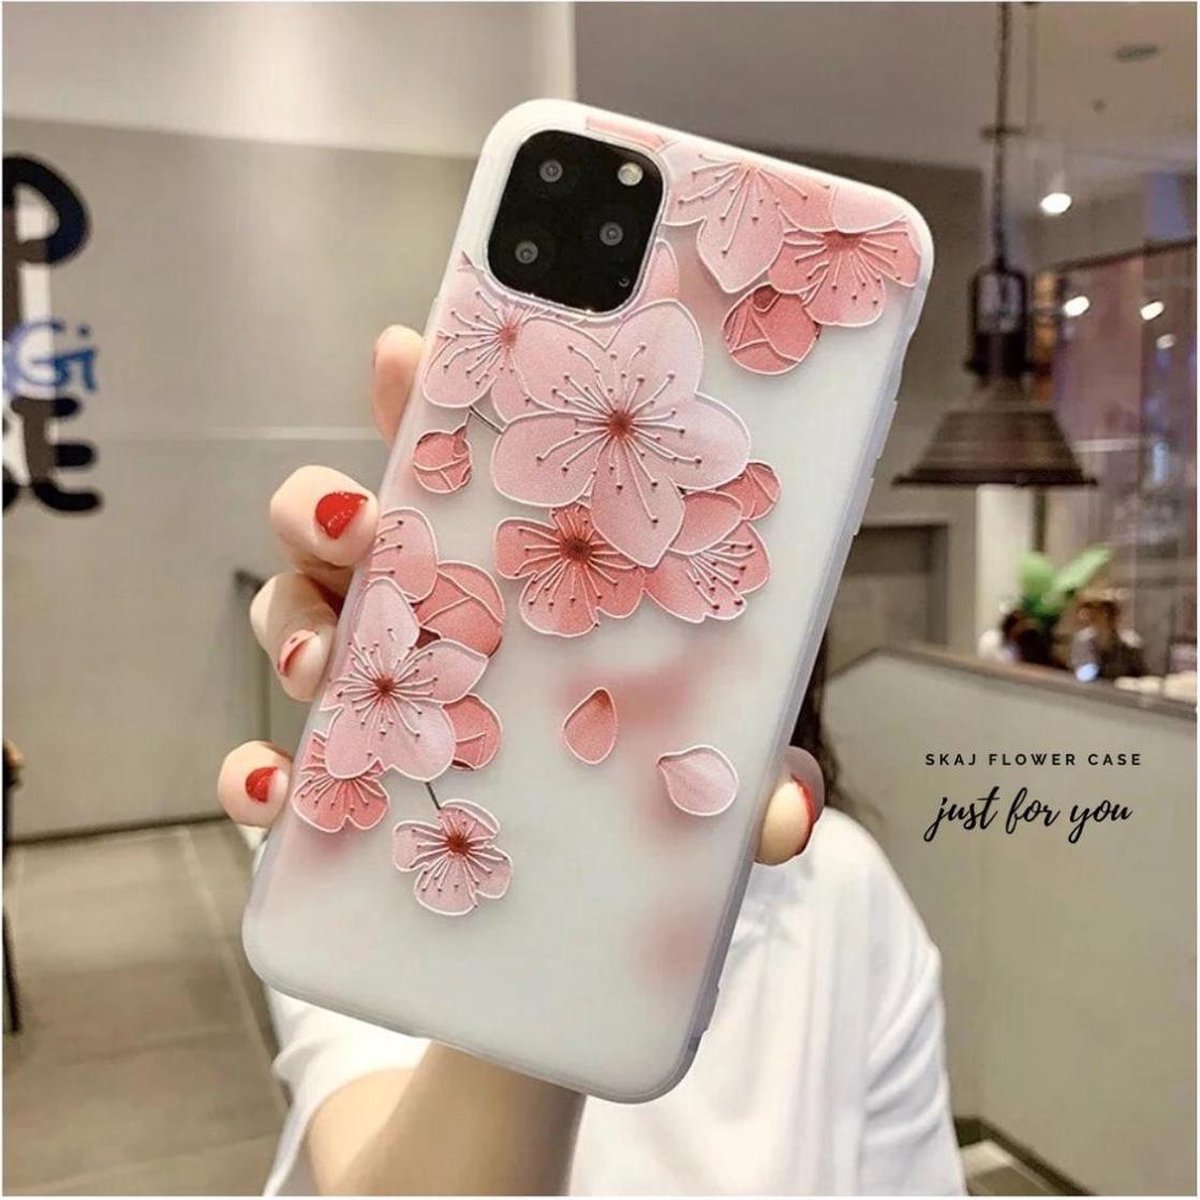 iPhone 11 Pro Max Hoesje Shock Proof Siliconen Hoes Case Cover Transparant - Bloemen